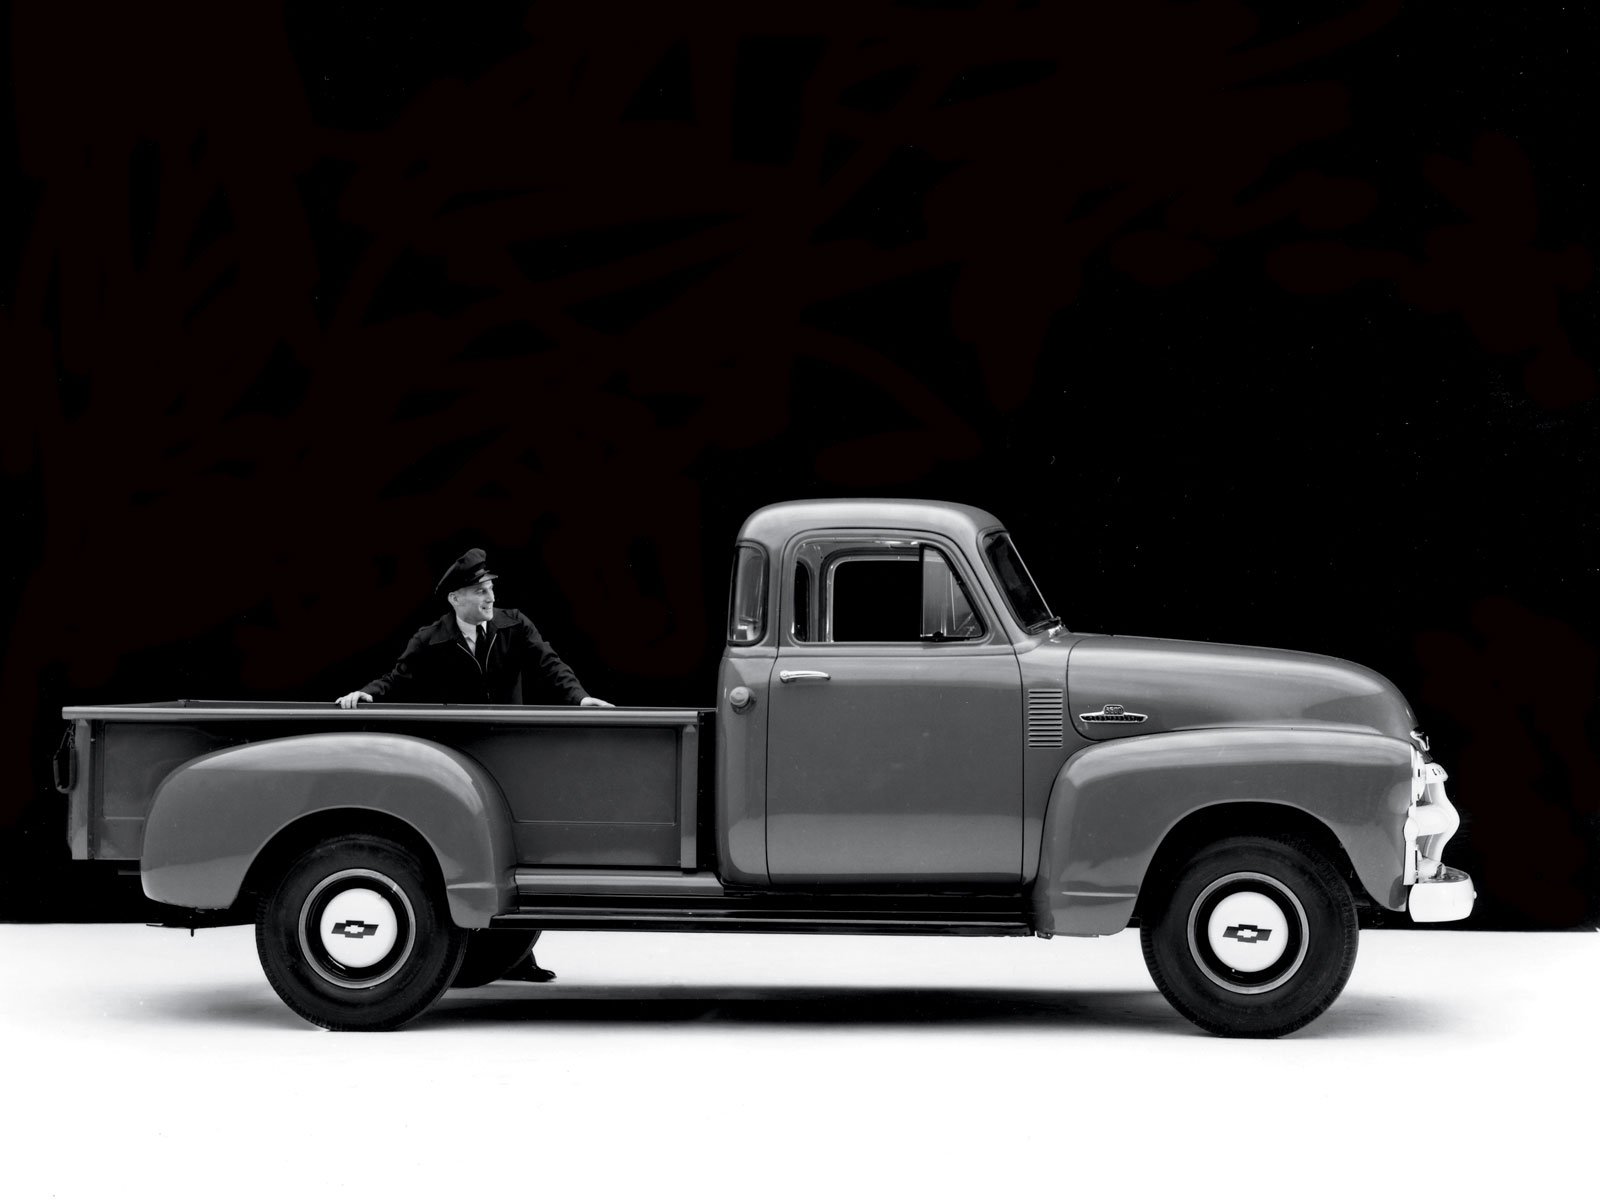 37 Old Chevy Truck Wallpapers On Wallpapersafari